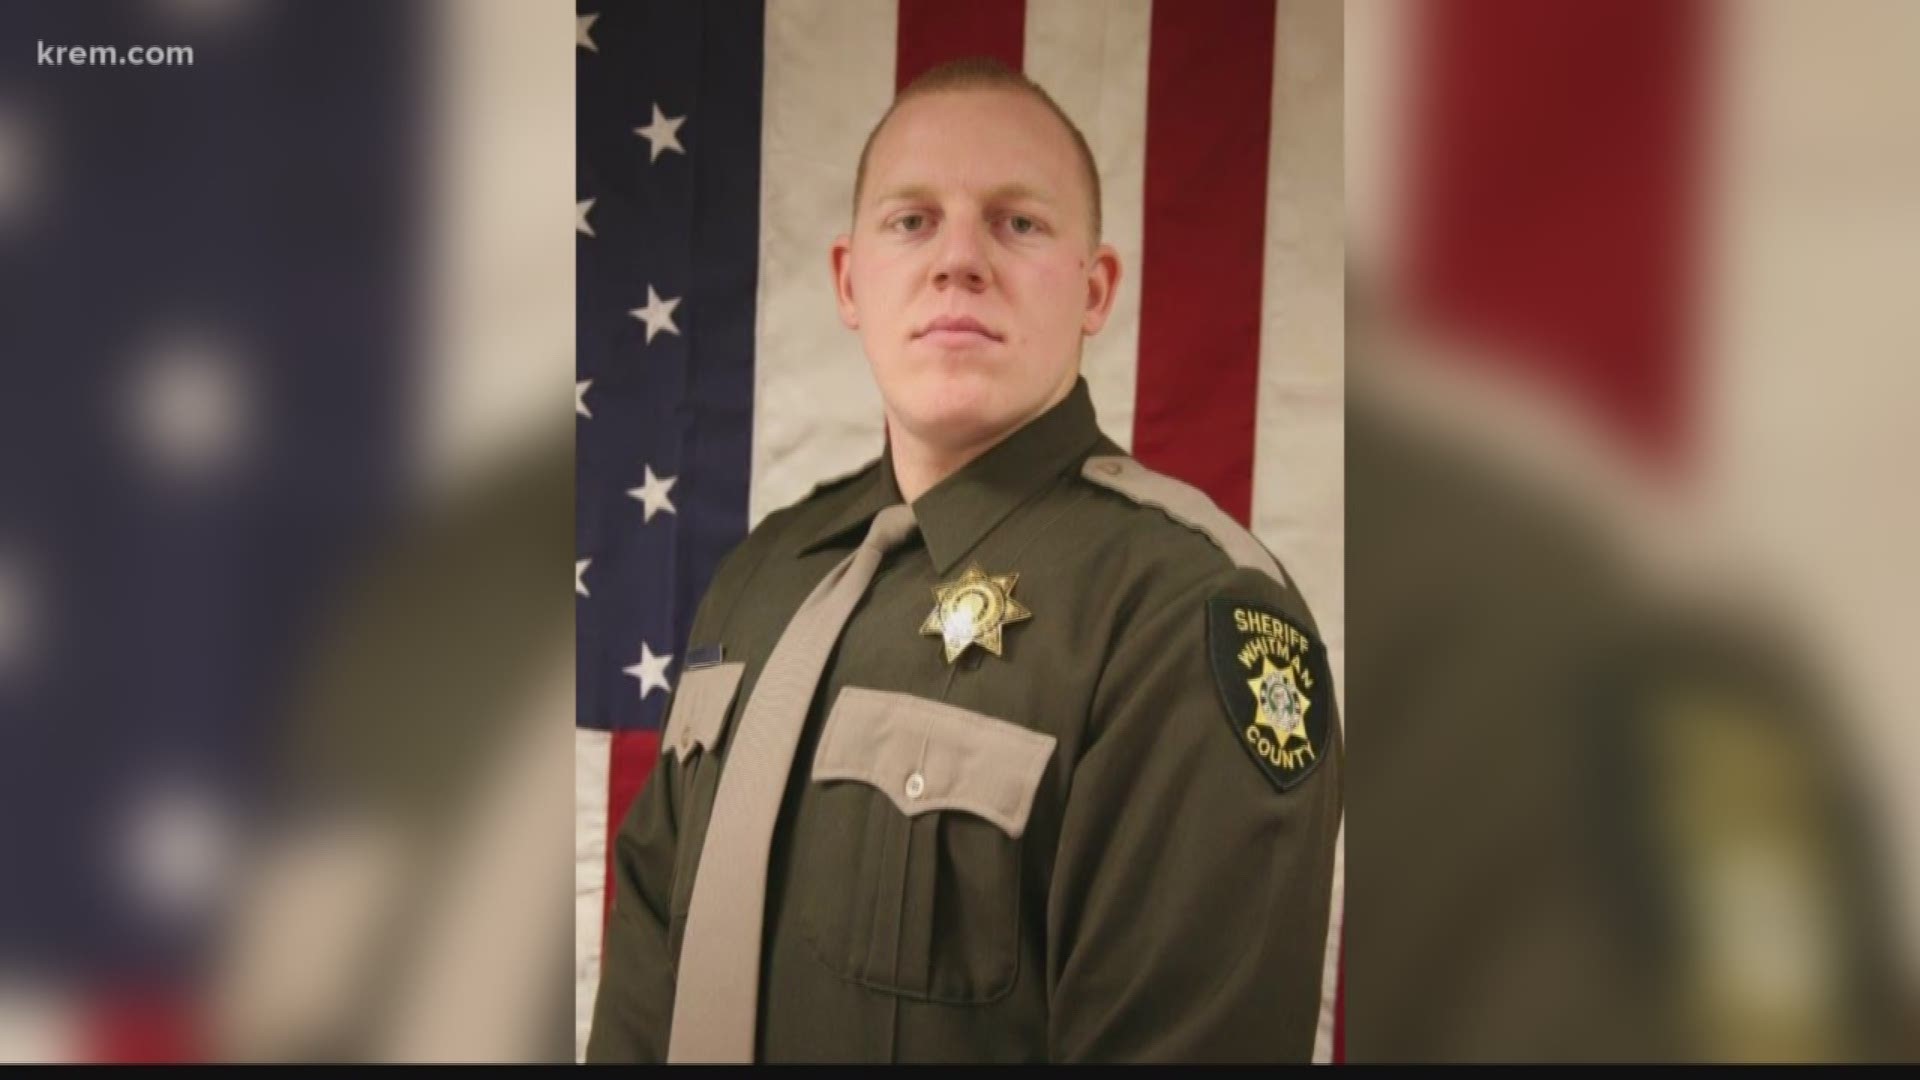 KREM Reporter Taylor Viydo visited Pullman to learn about how officers from Palouse area law enforcement agencies are covering shifts for Whitman County Sheriff's deputies so they can attend the funeral of Cowlitz Co. deputy Justin DeRosier.